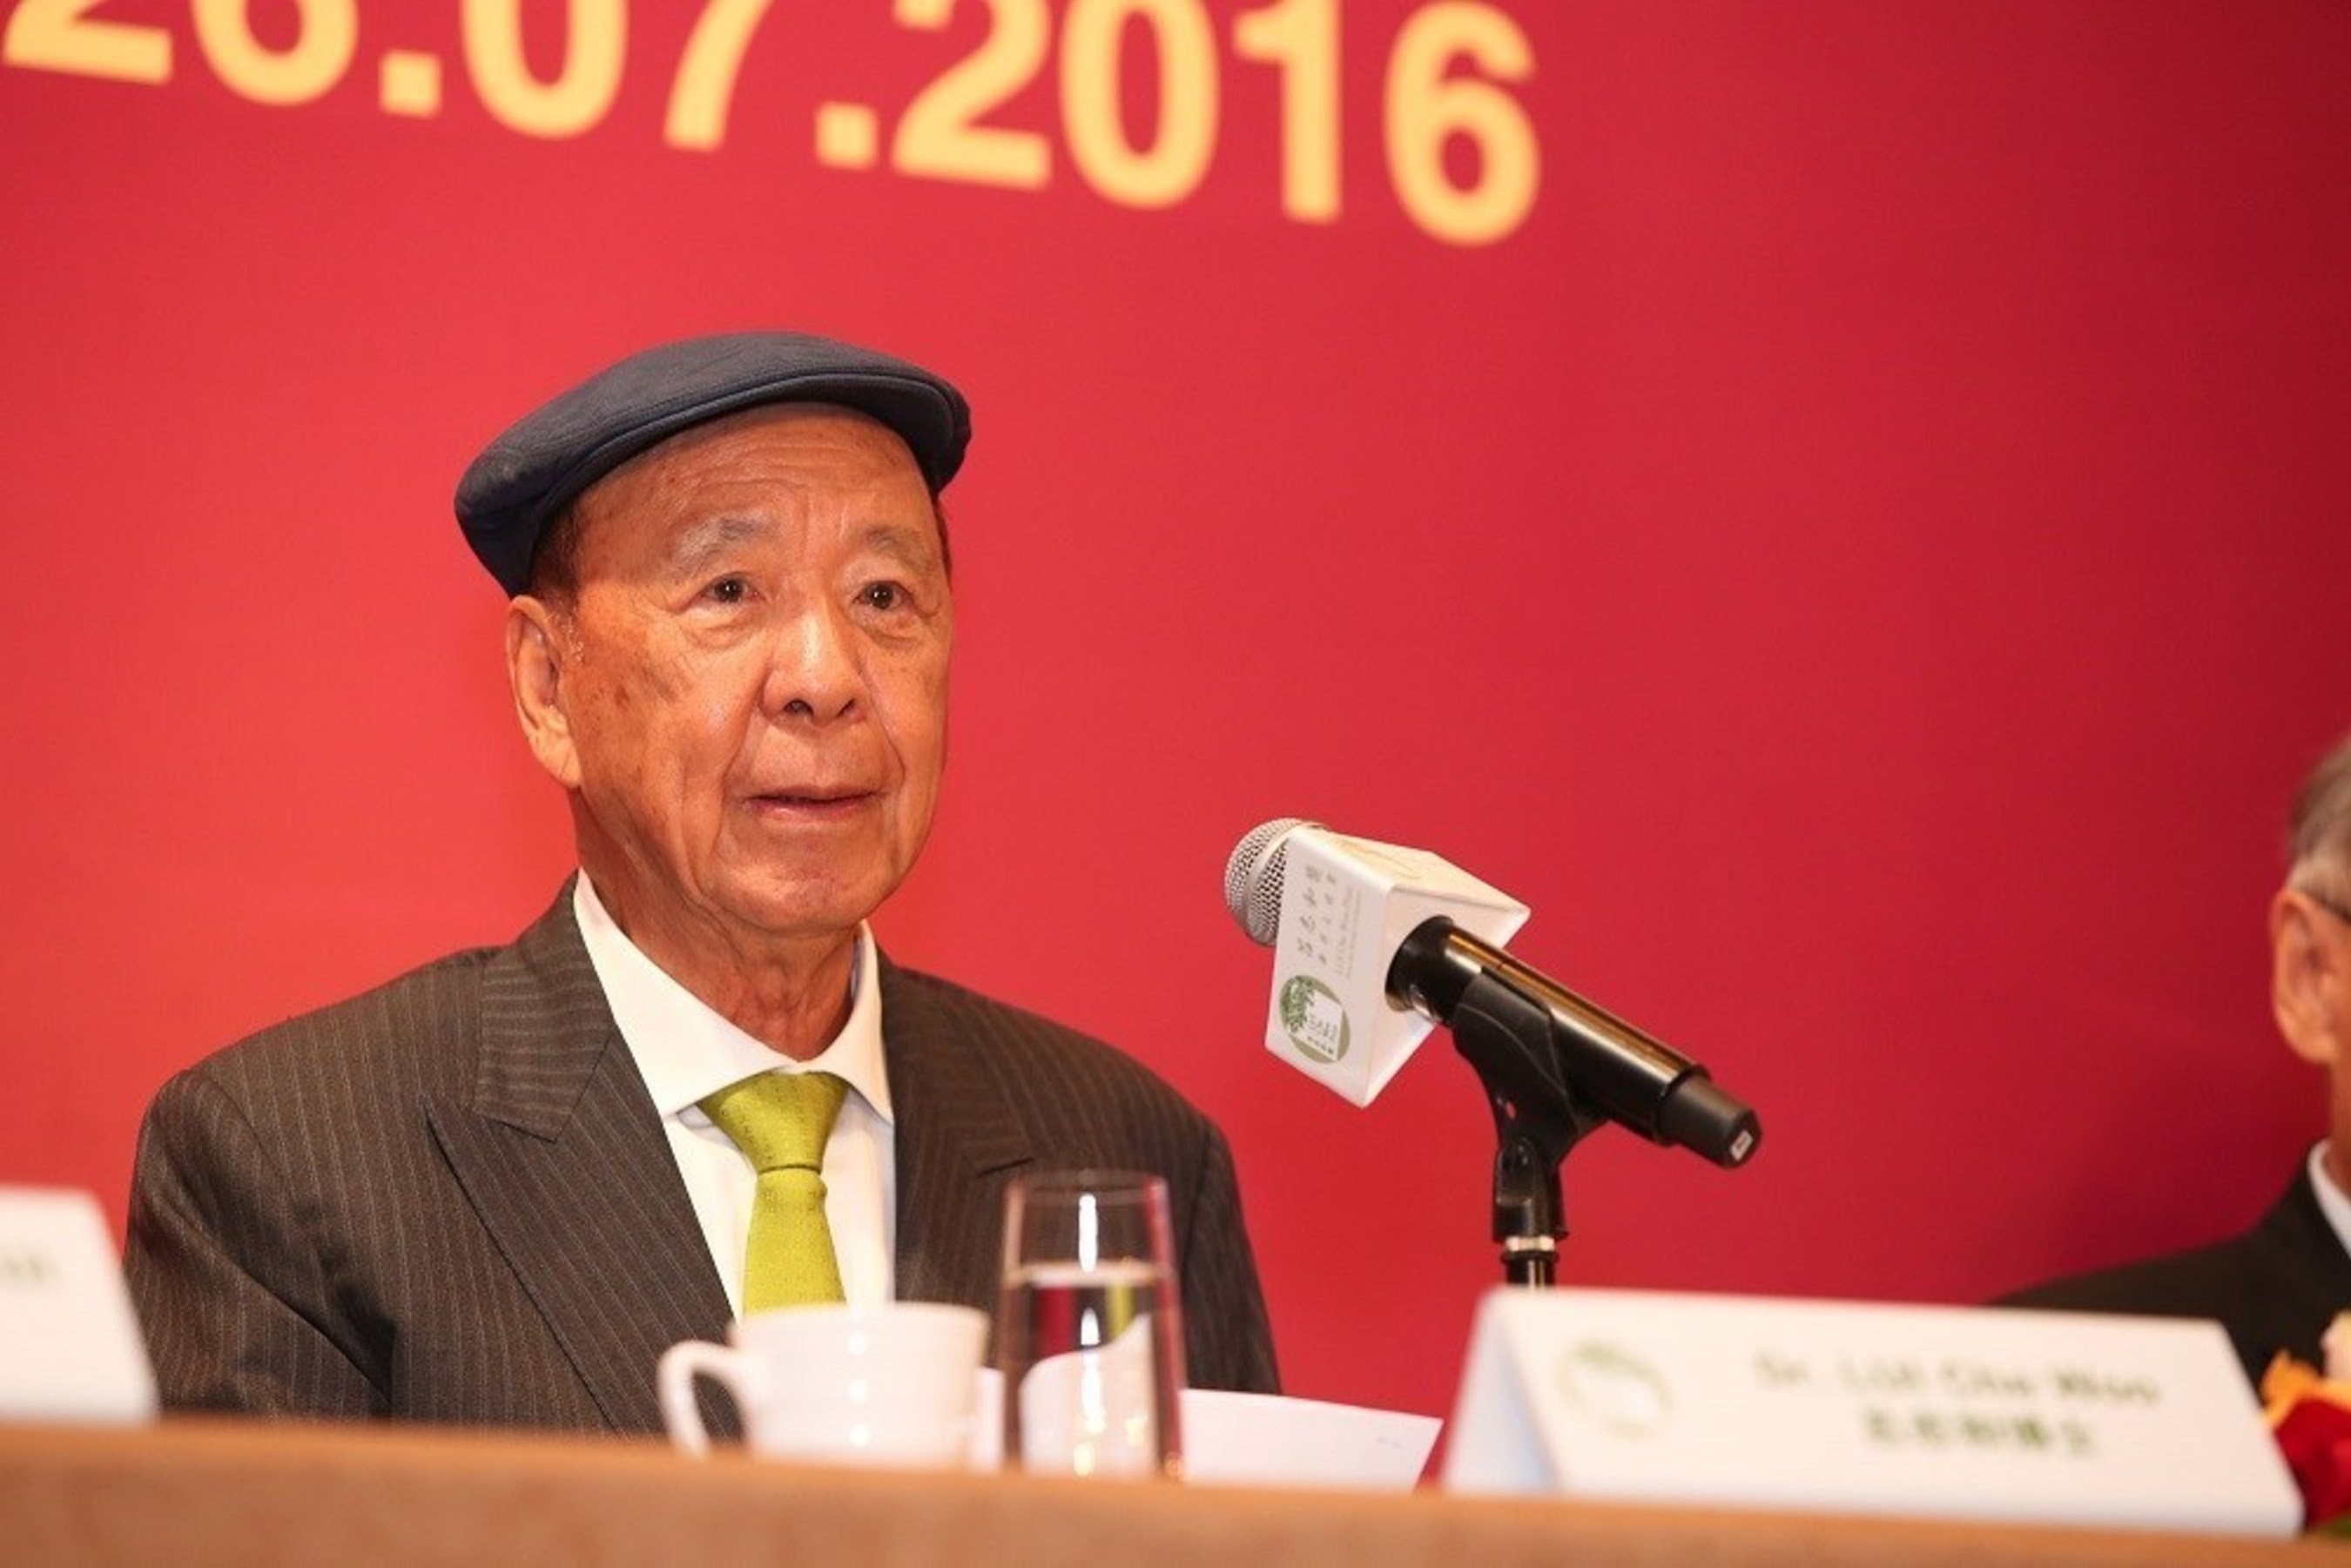 Dr. Lui Che Woo, Founder & Chairman of the Board of Governors cum Prize Council, LUI Che Woo Prize